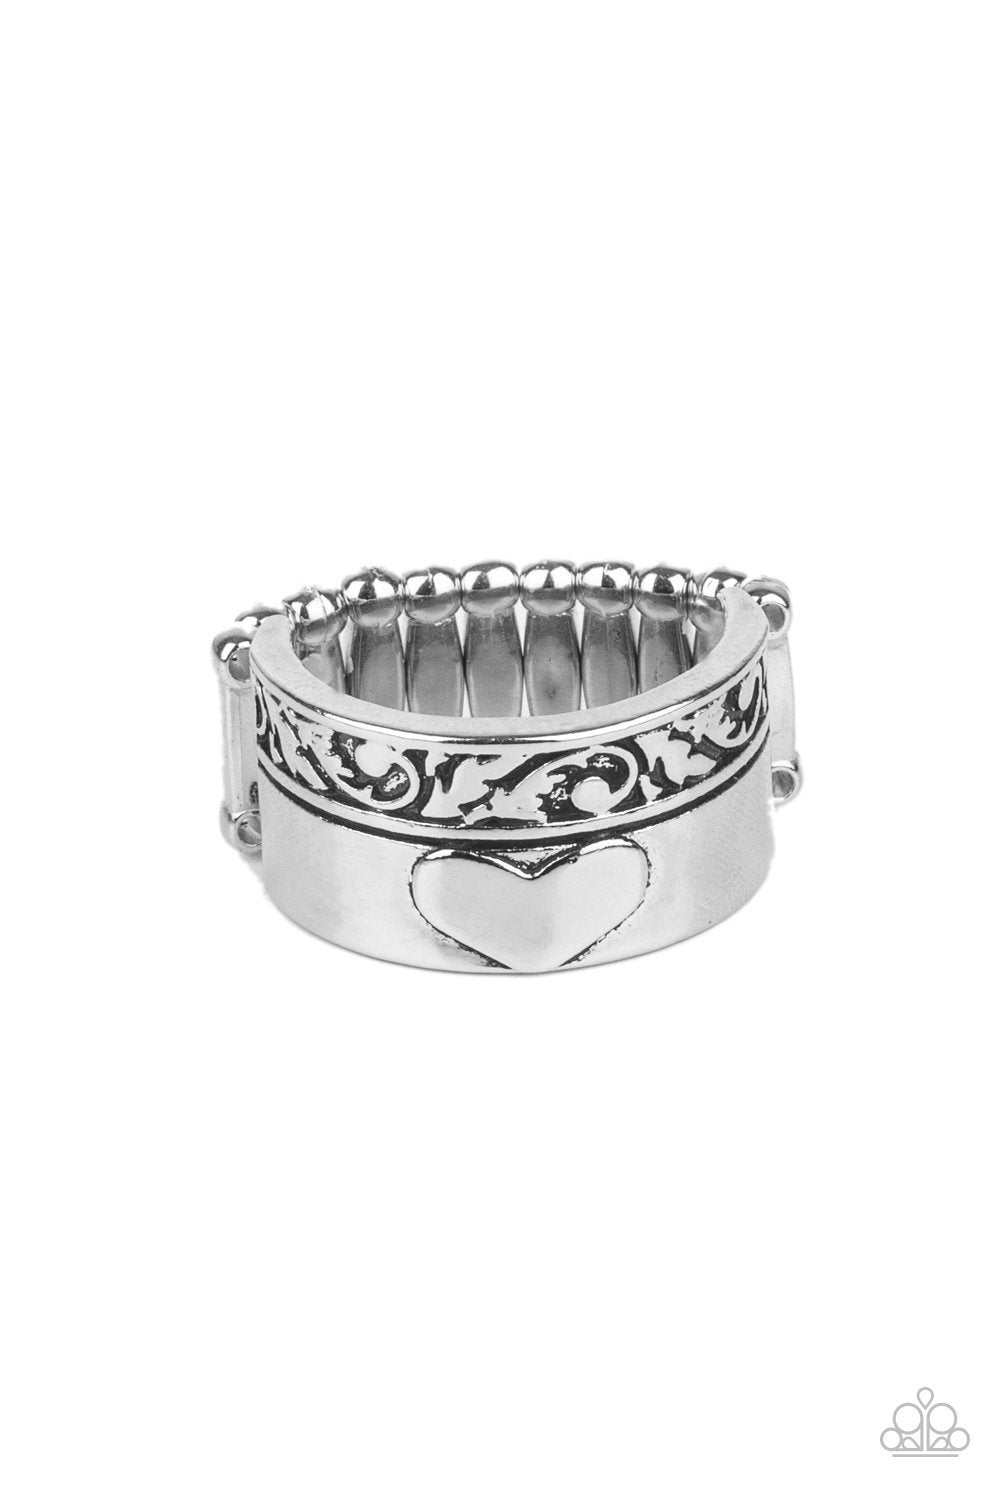 Garden Romance Silver Heart Ring - Paparazzi Accessories- lightbox - CarasShop.com - $5 Jewelry by Cara Jewels